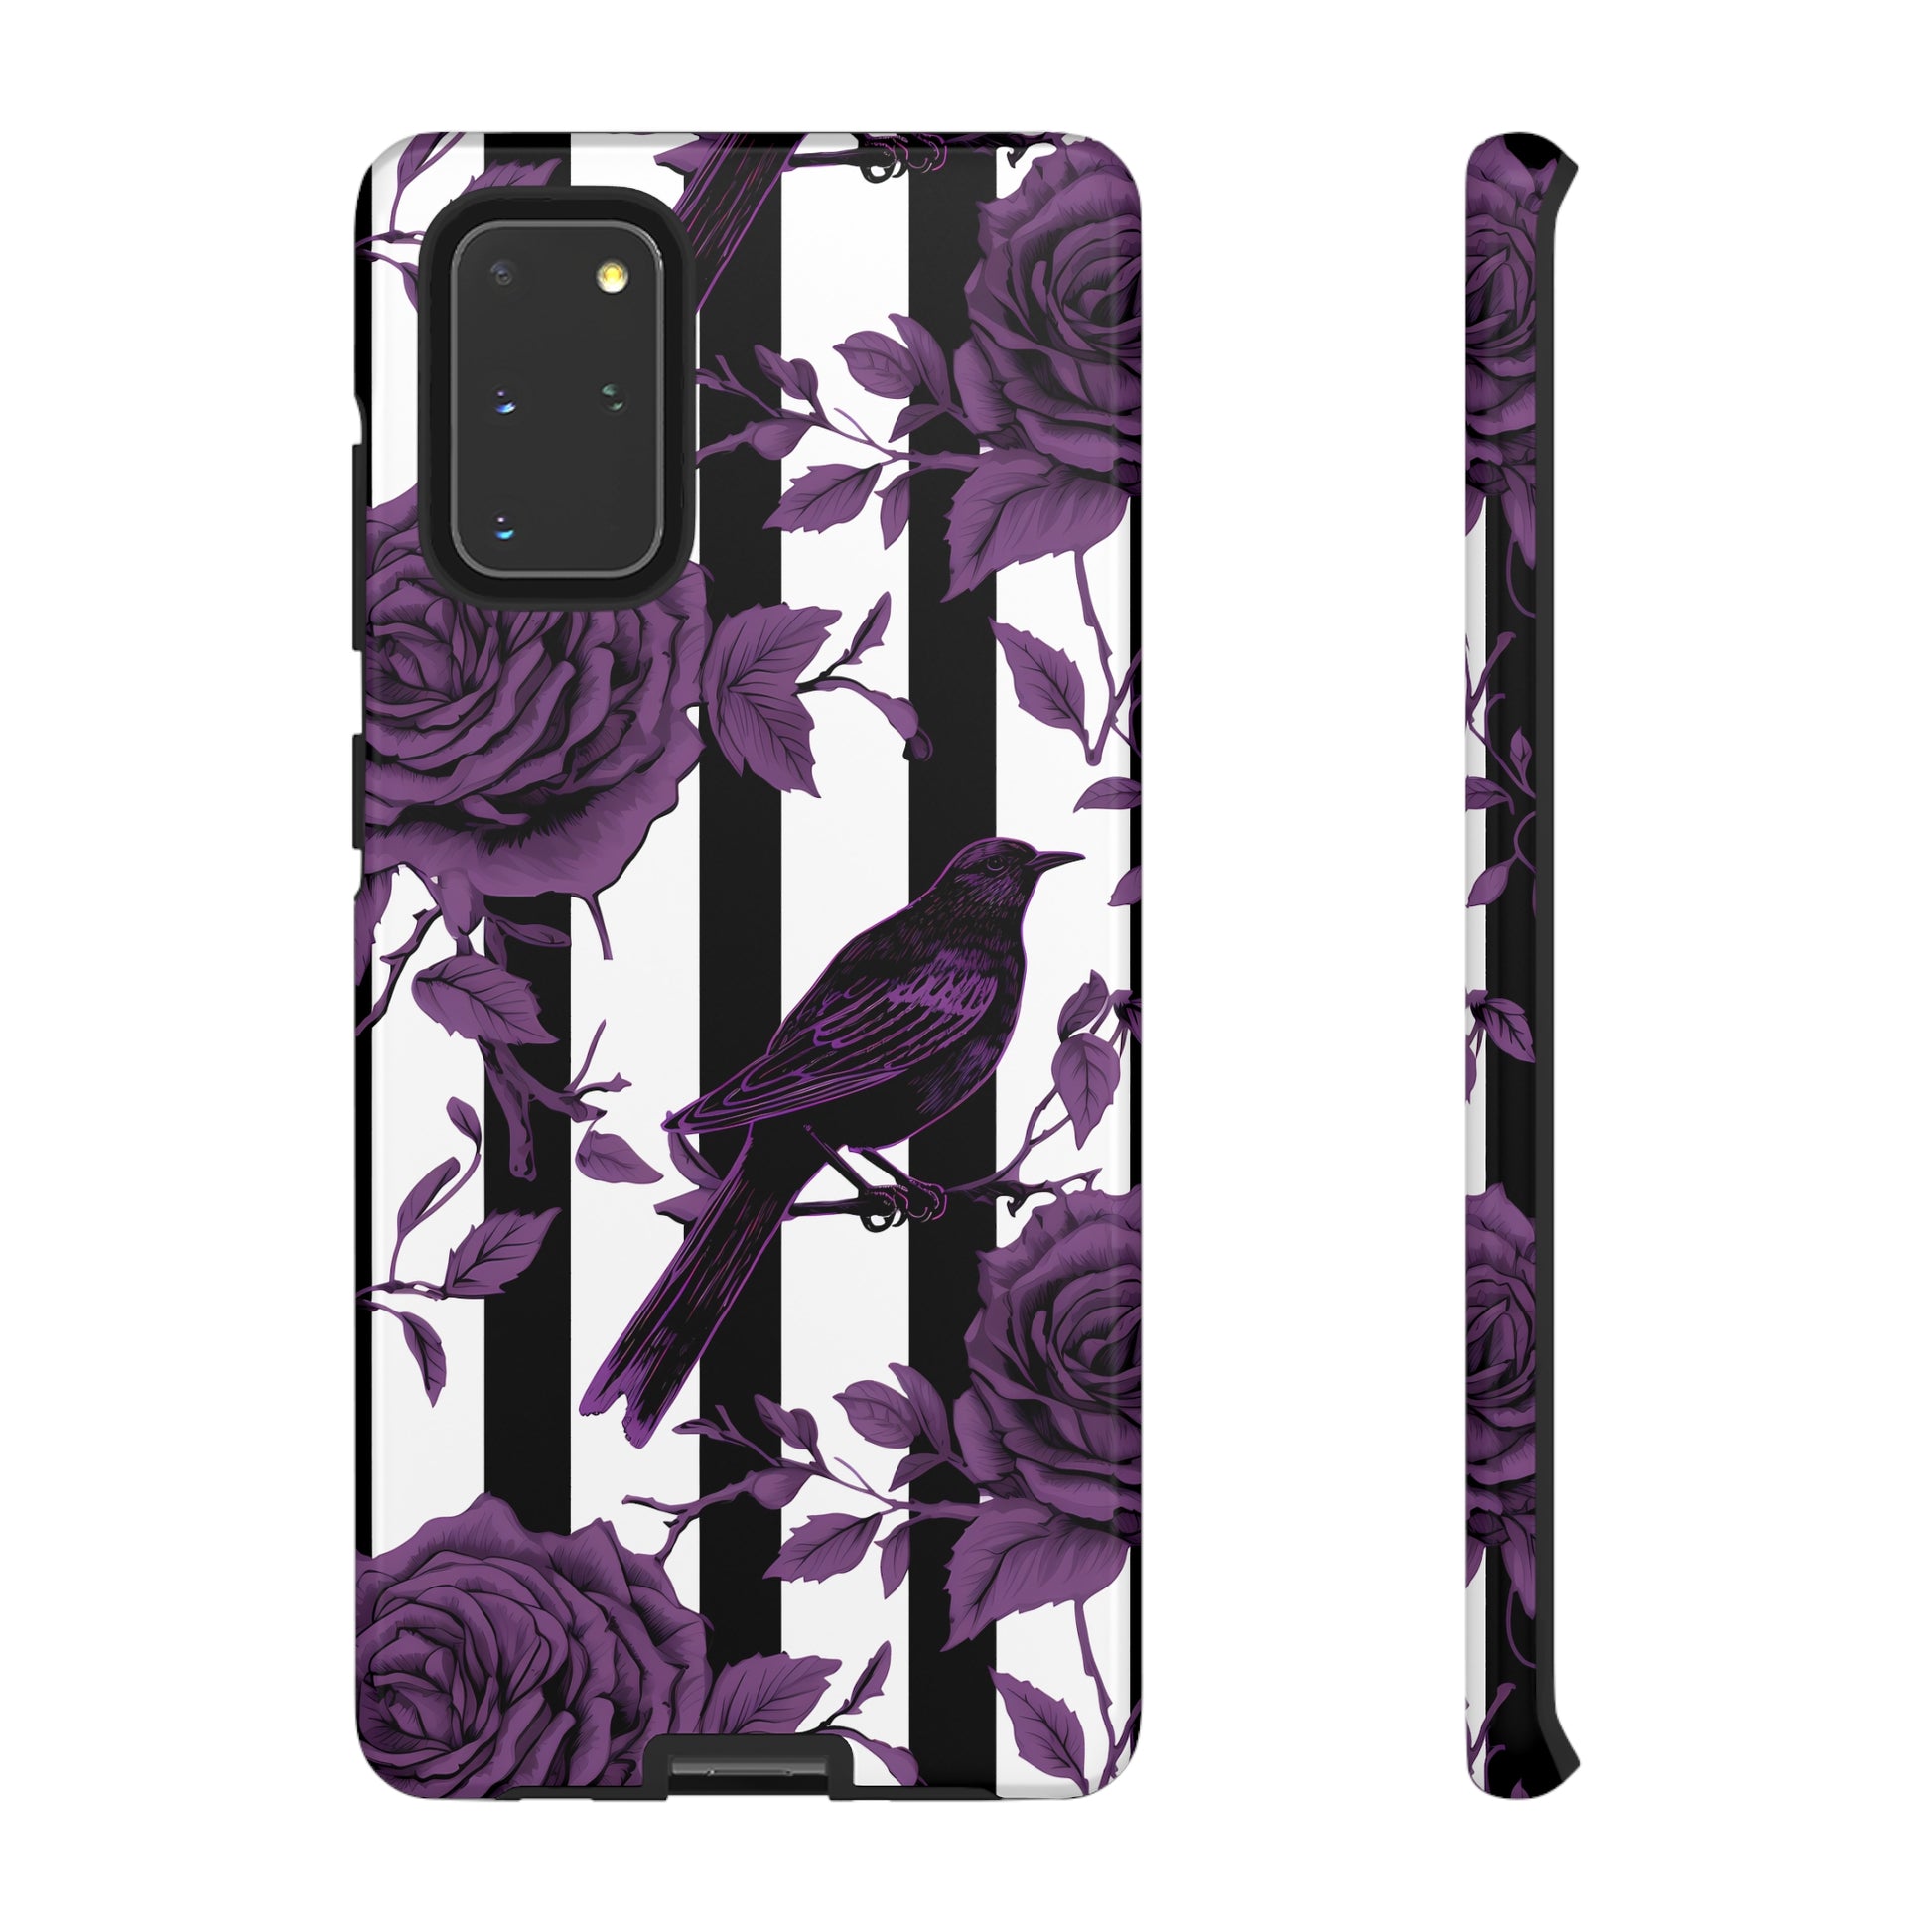 Striped Crows and Roses Tough Cases for iPhone Samsung Google PhonesPhone CaseVTZdesignsSamsung Galaxy S20+GlossyAccessoriescrowsGlossy